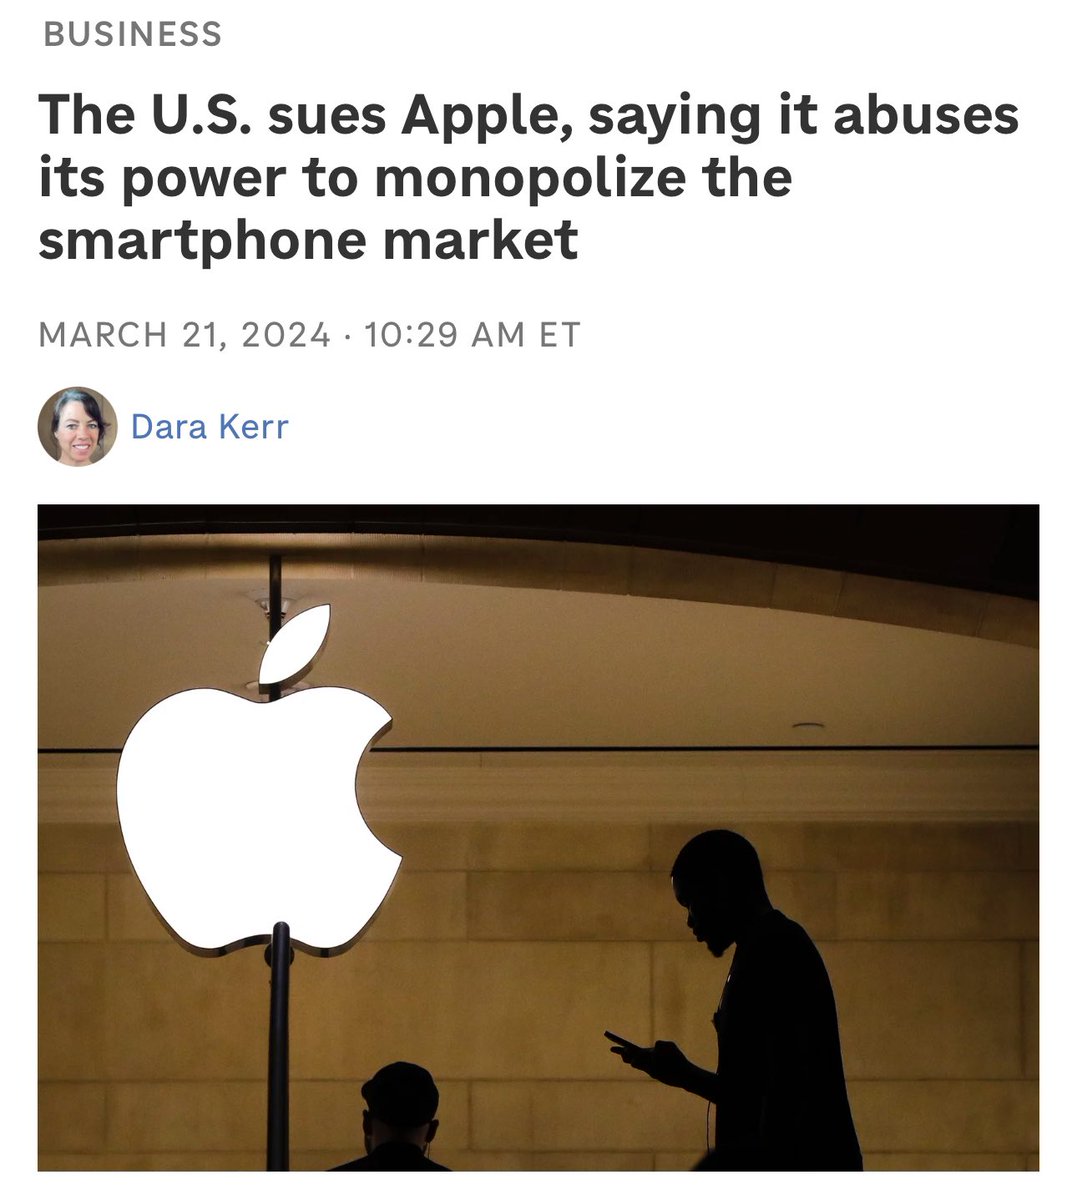 Other Smartphones exist 📱
Other Headphones exist 🎧
Other Smartwatches exist ⌚️
Other Computers exist 💻
Other tables exist 
Other Ecosystems exist 
Other Messaging apps exist 

Consumers can buy whatever they want.  No one is forcing anyone to buy an Apple product 

But since